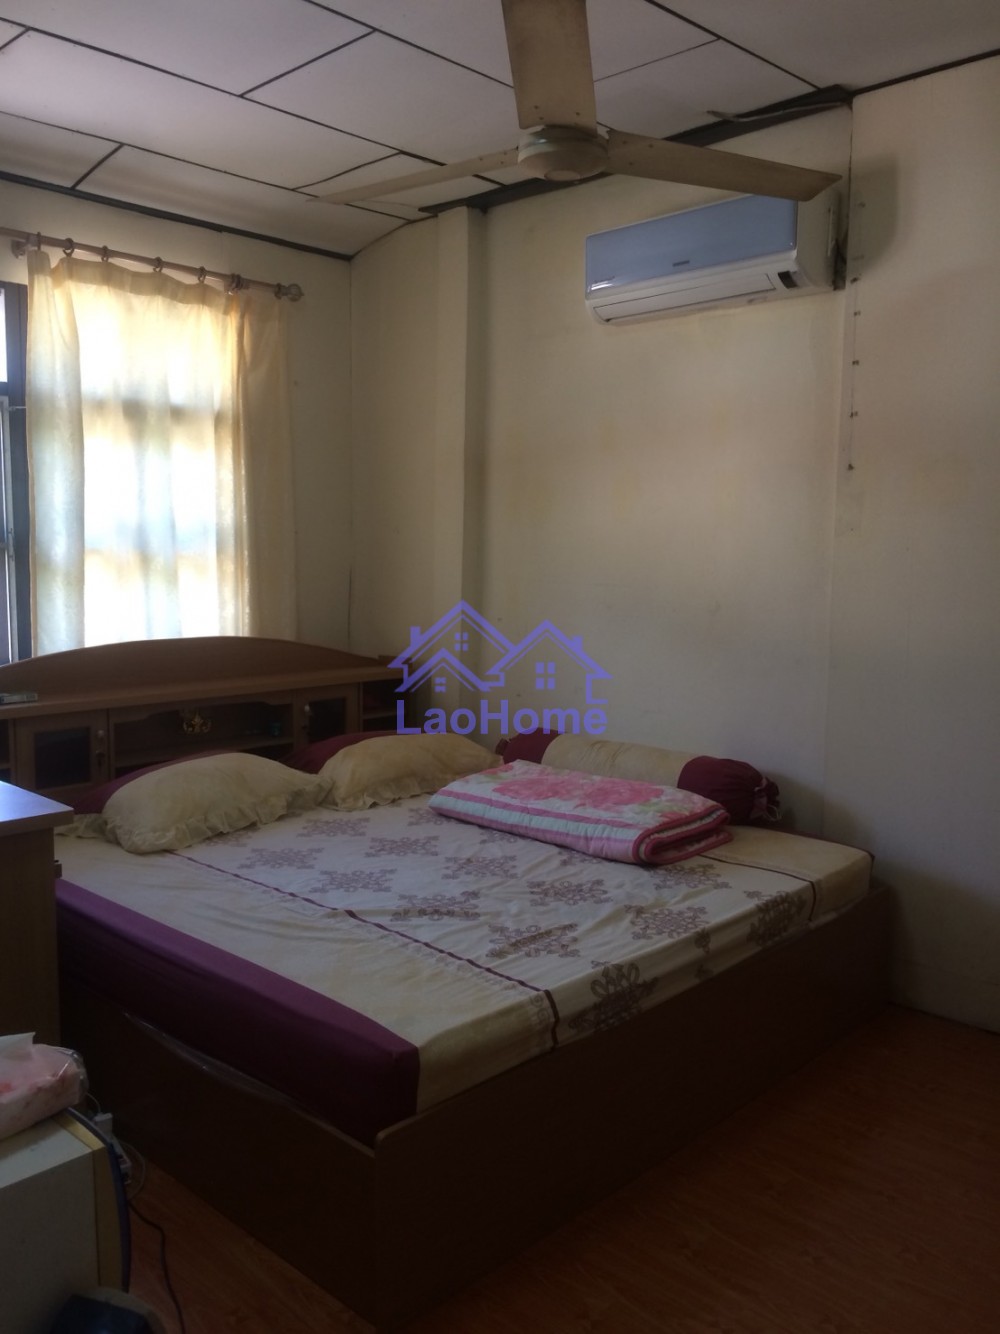 ID: 1252 - House for rent lao style